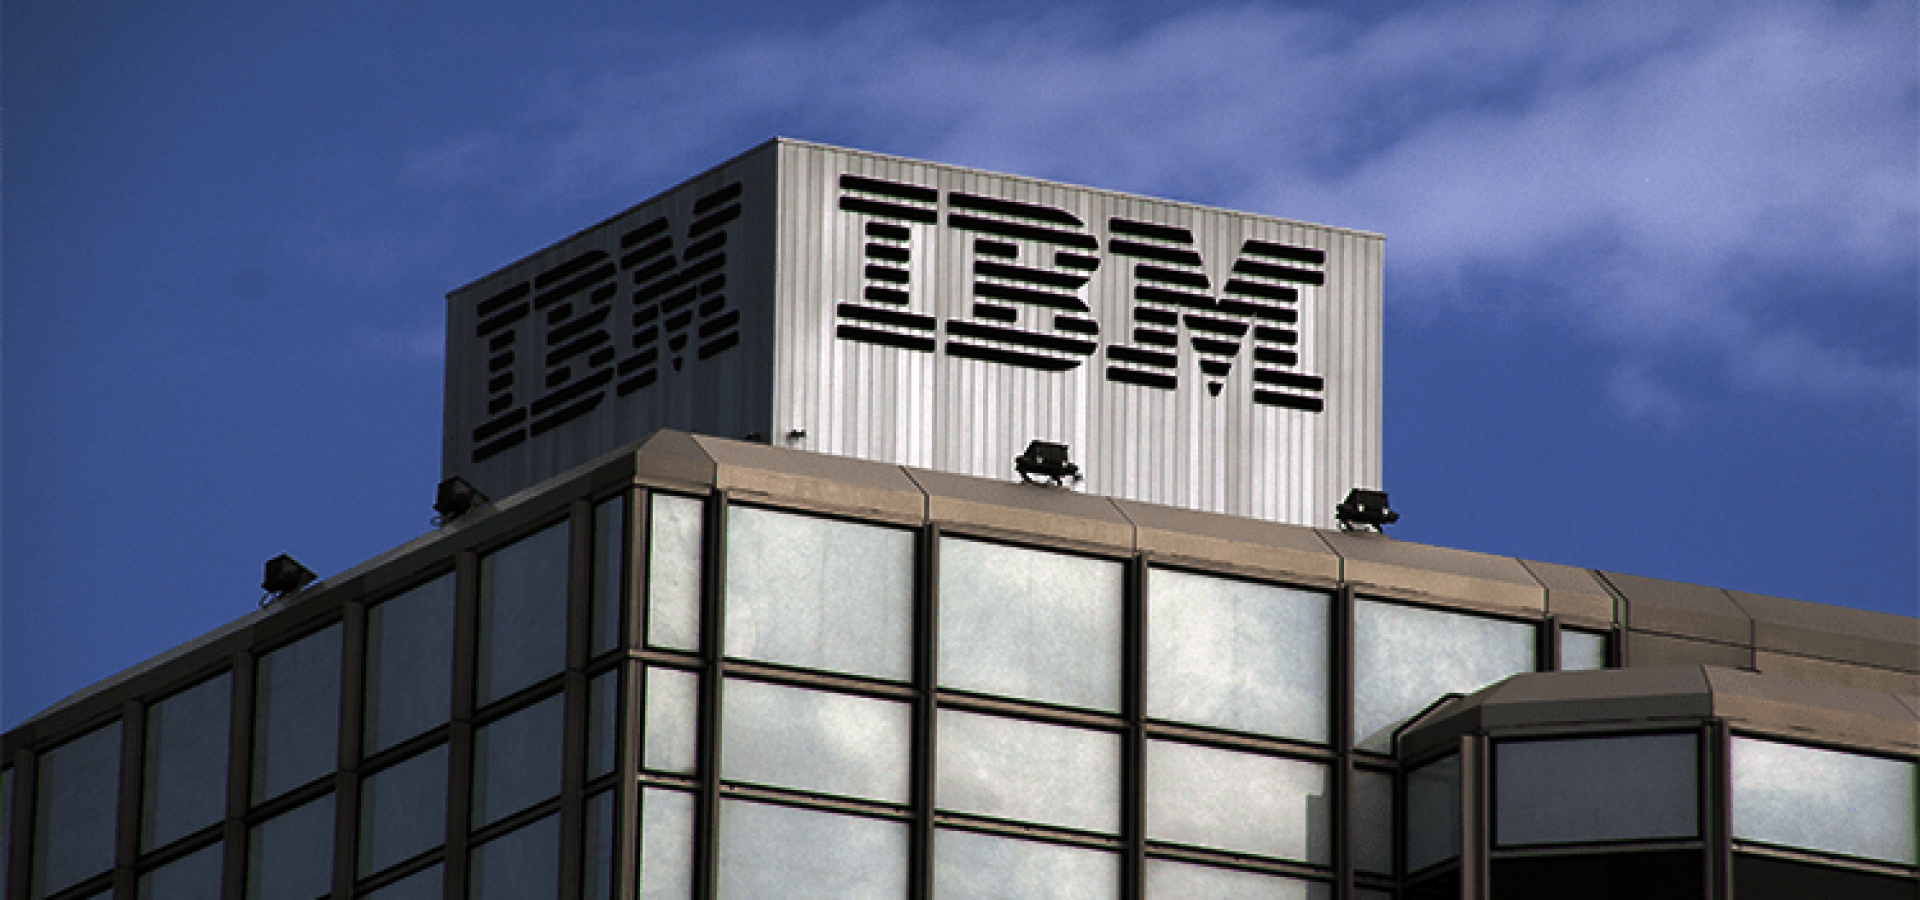 IBM Jobs Laid off, 1,700 Employees Affected - Wibest Broker